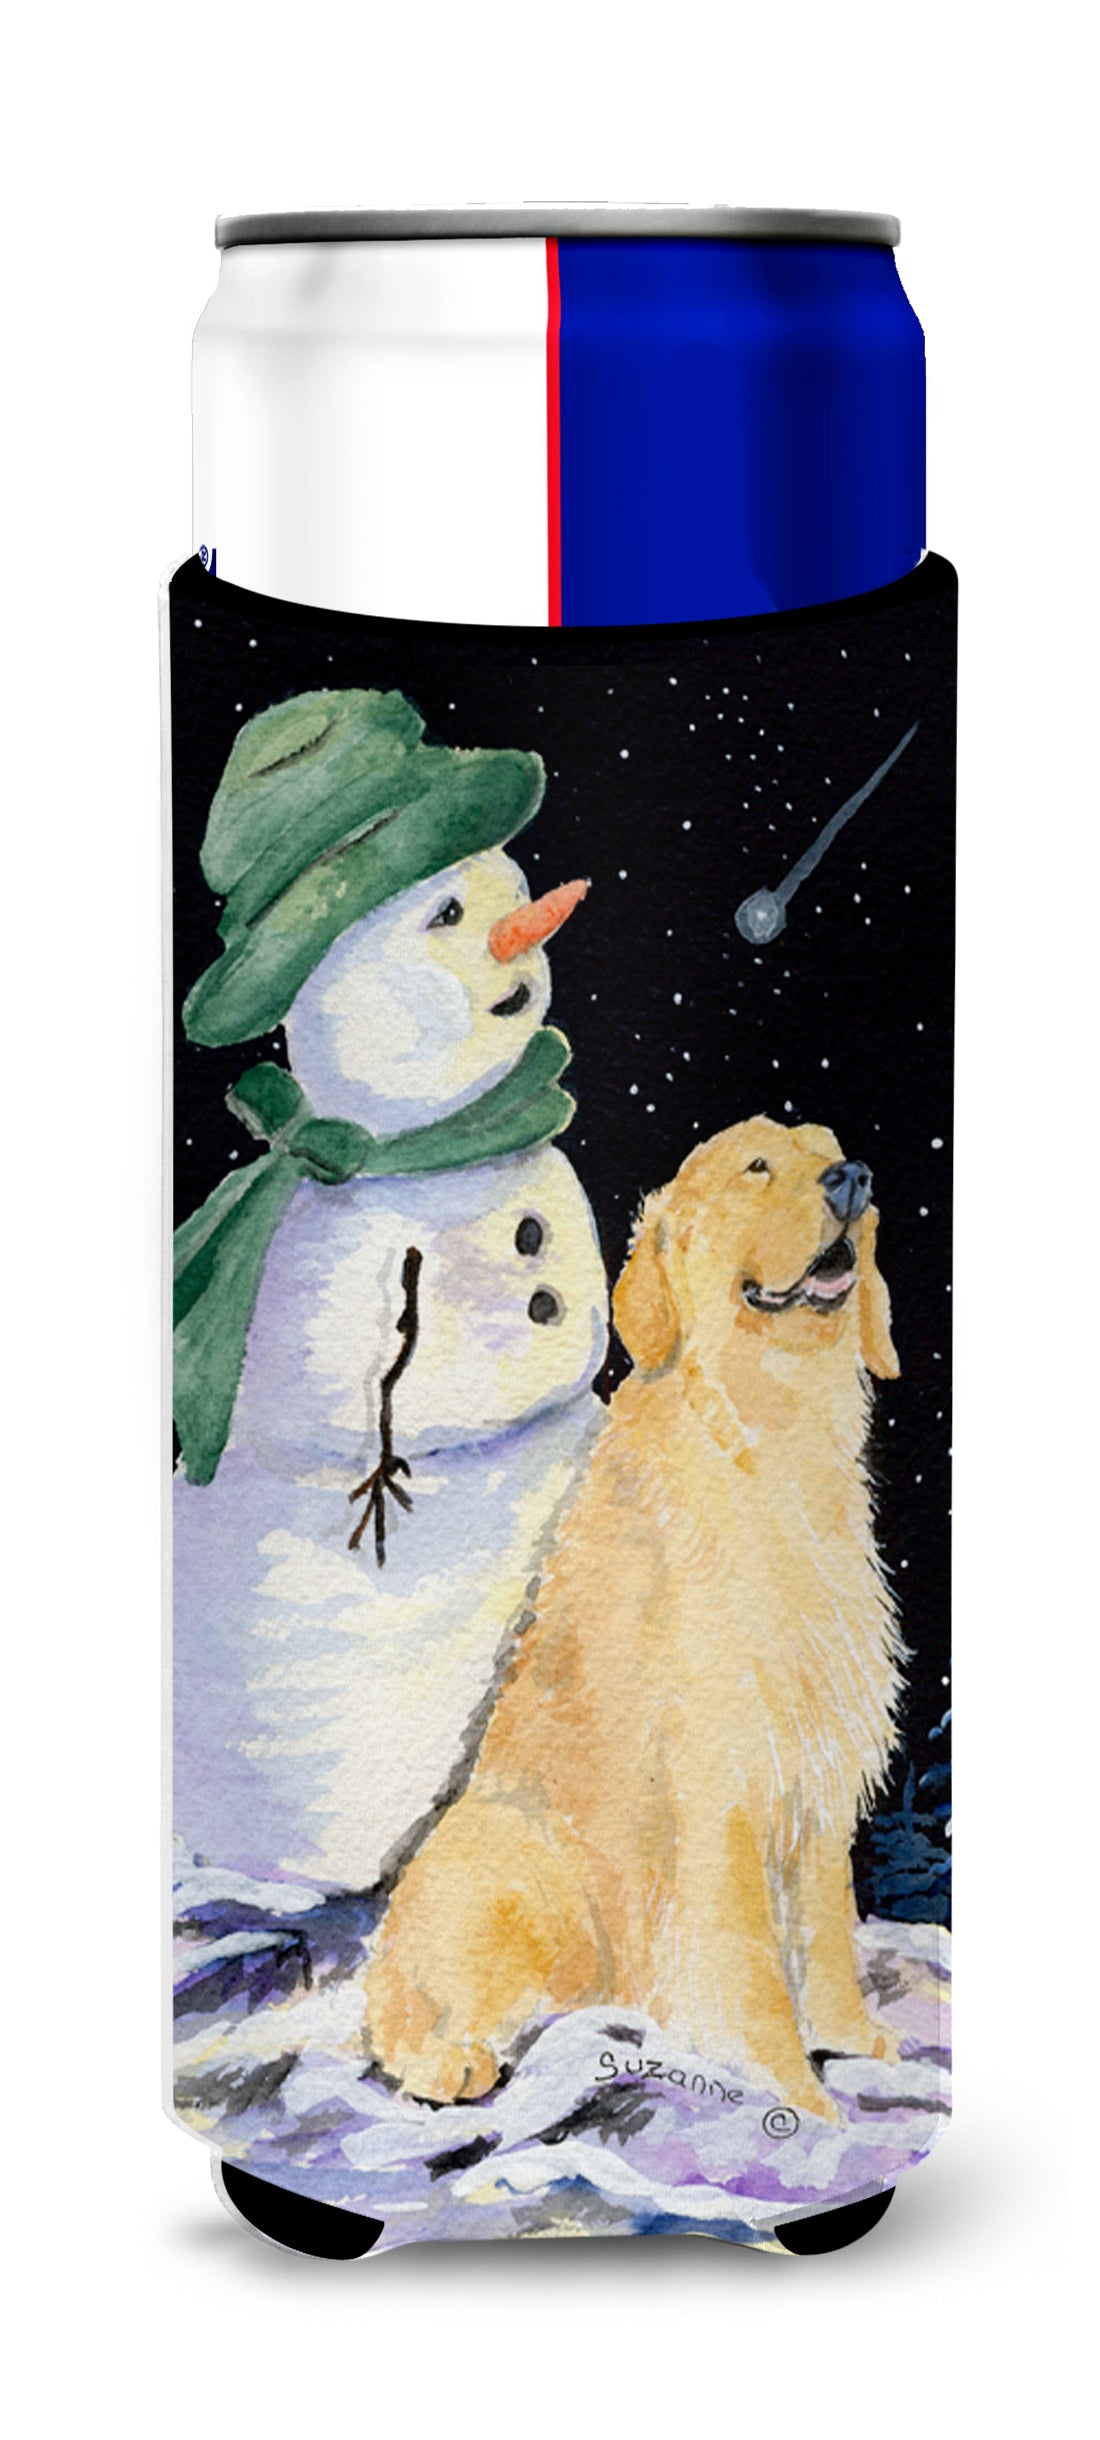 Golden Retriever with Snowman in Green Hat Ultra Beverage Insulators for slim cans SS8577MUK